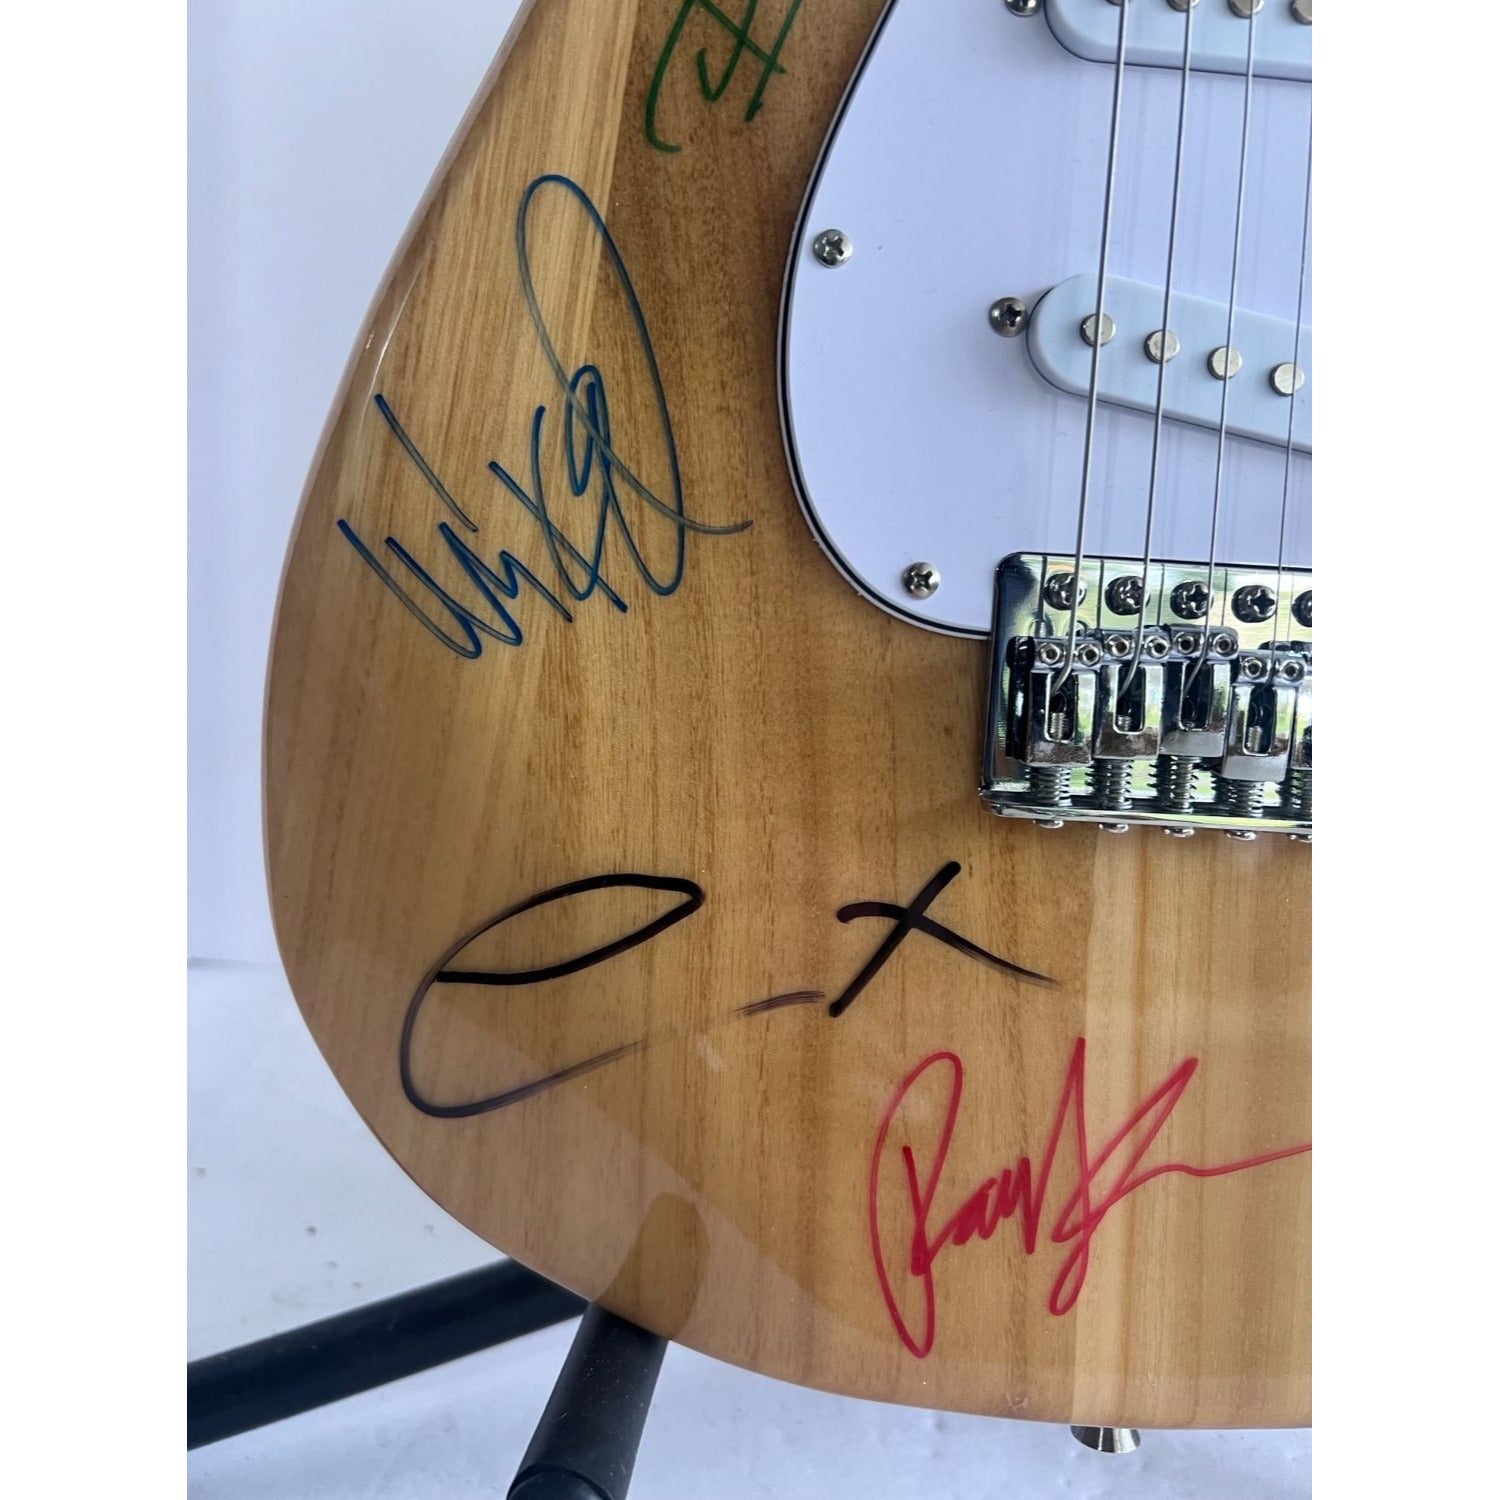 Linkin Park Chester Bennington complete band signed Stratocaster electric guitar signed with proof